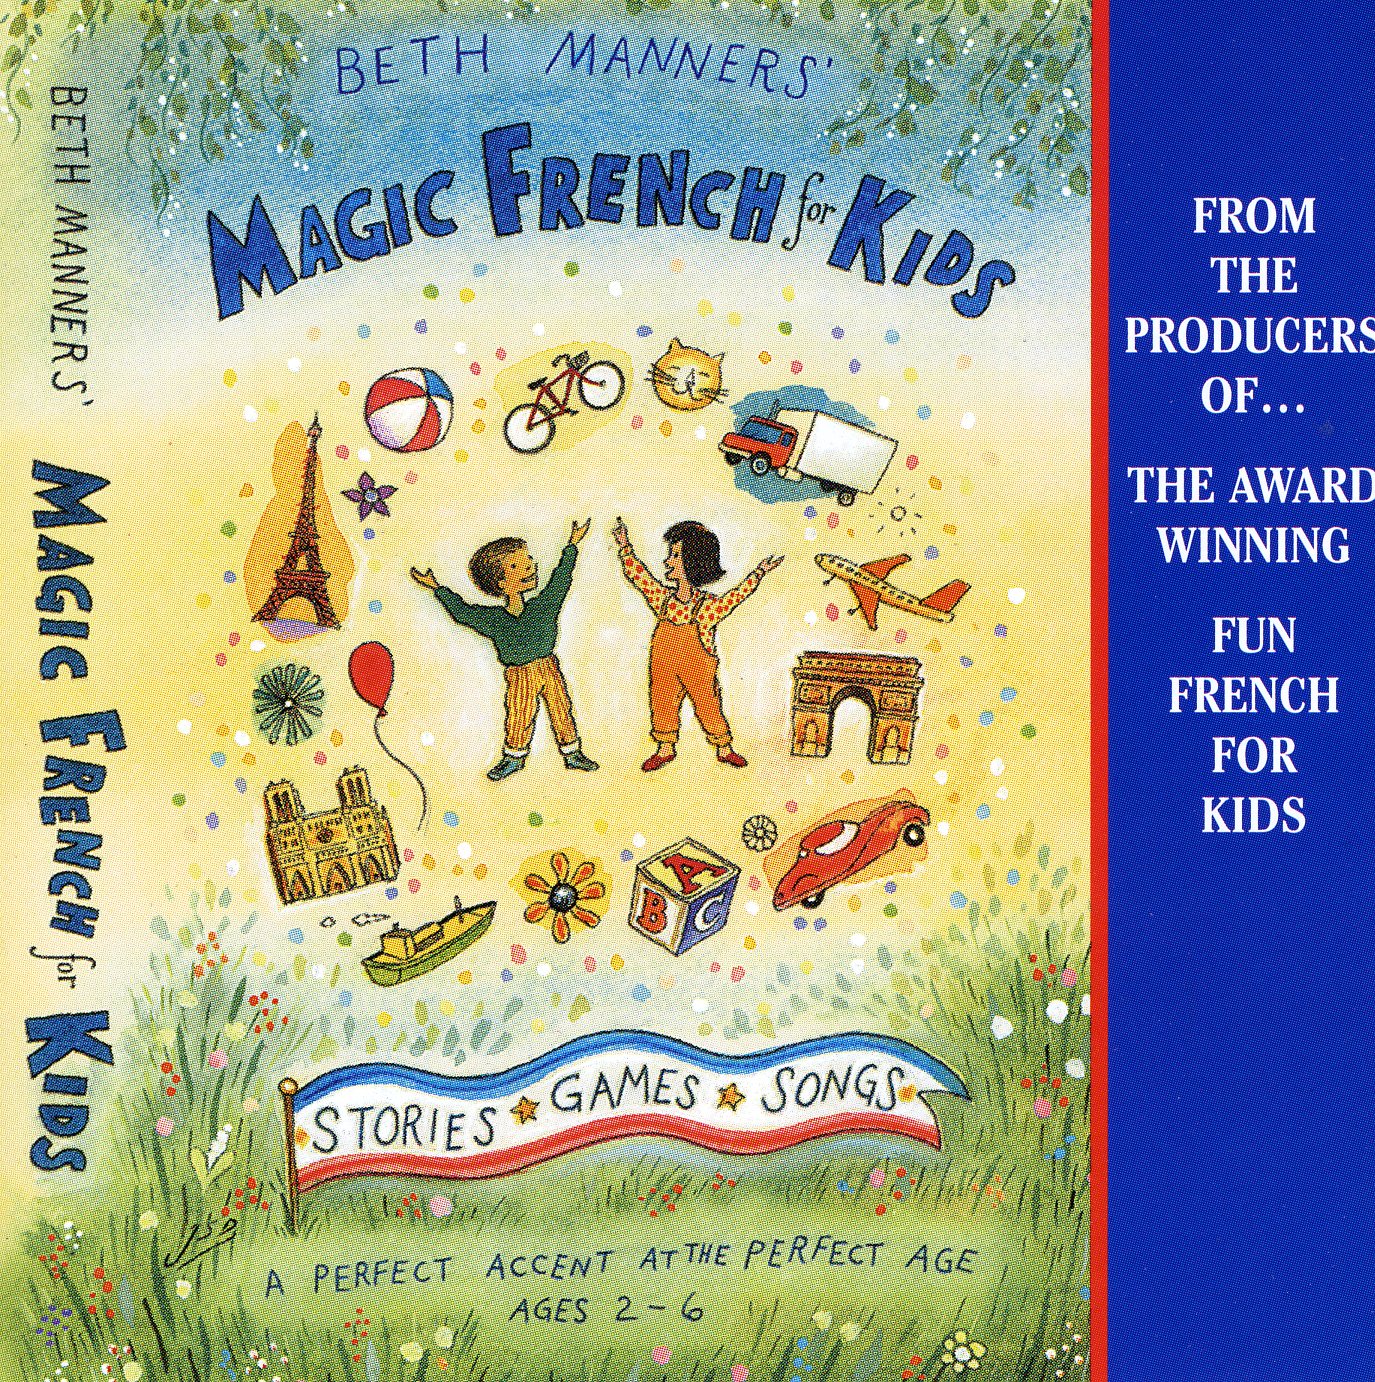 MAGIC FRENCH FOR KIDS